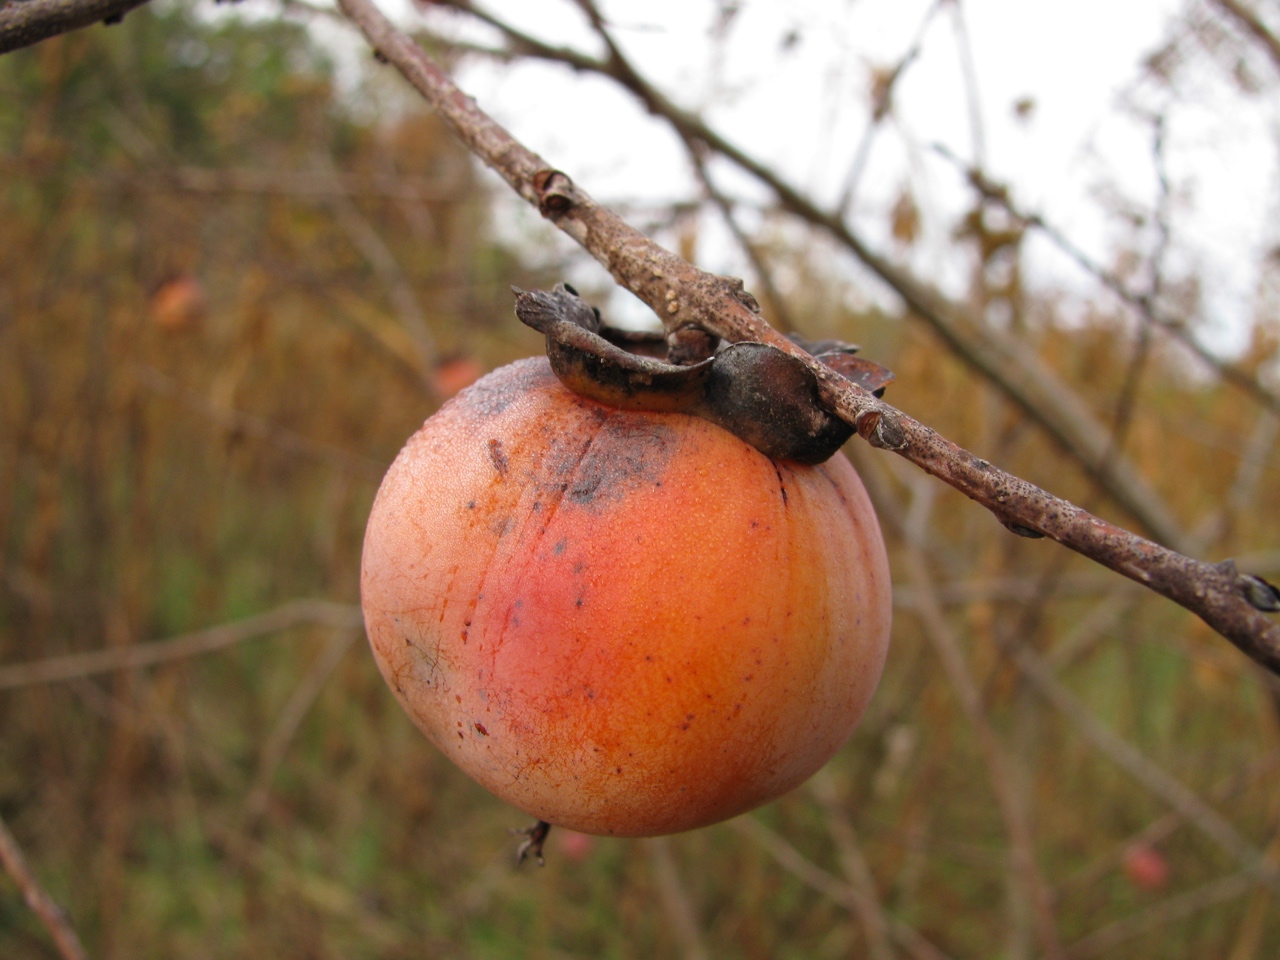 The Scientific Name is Diospyros virginiana. You will likely hear them called Persimmon, Possum Apple, Possumwood. This picture shows the Close-up of fruit late October of Diospyros virginiana